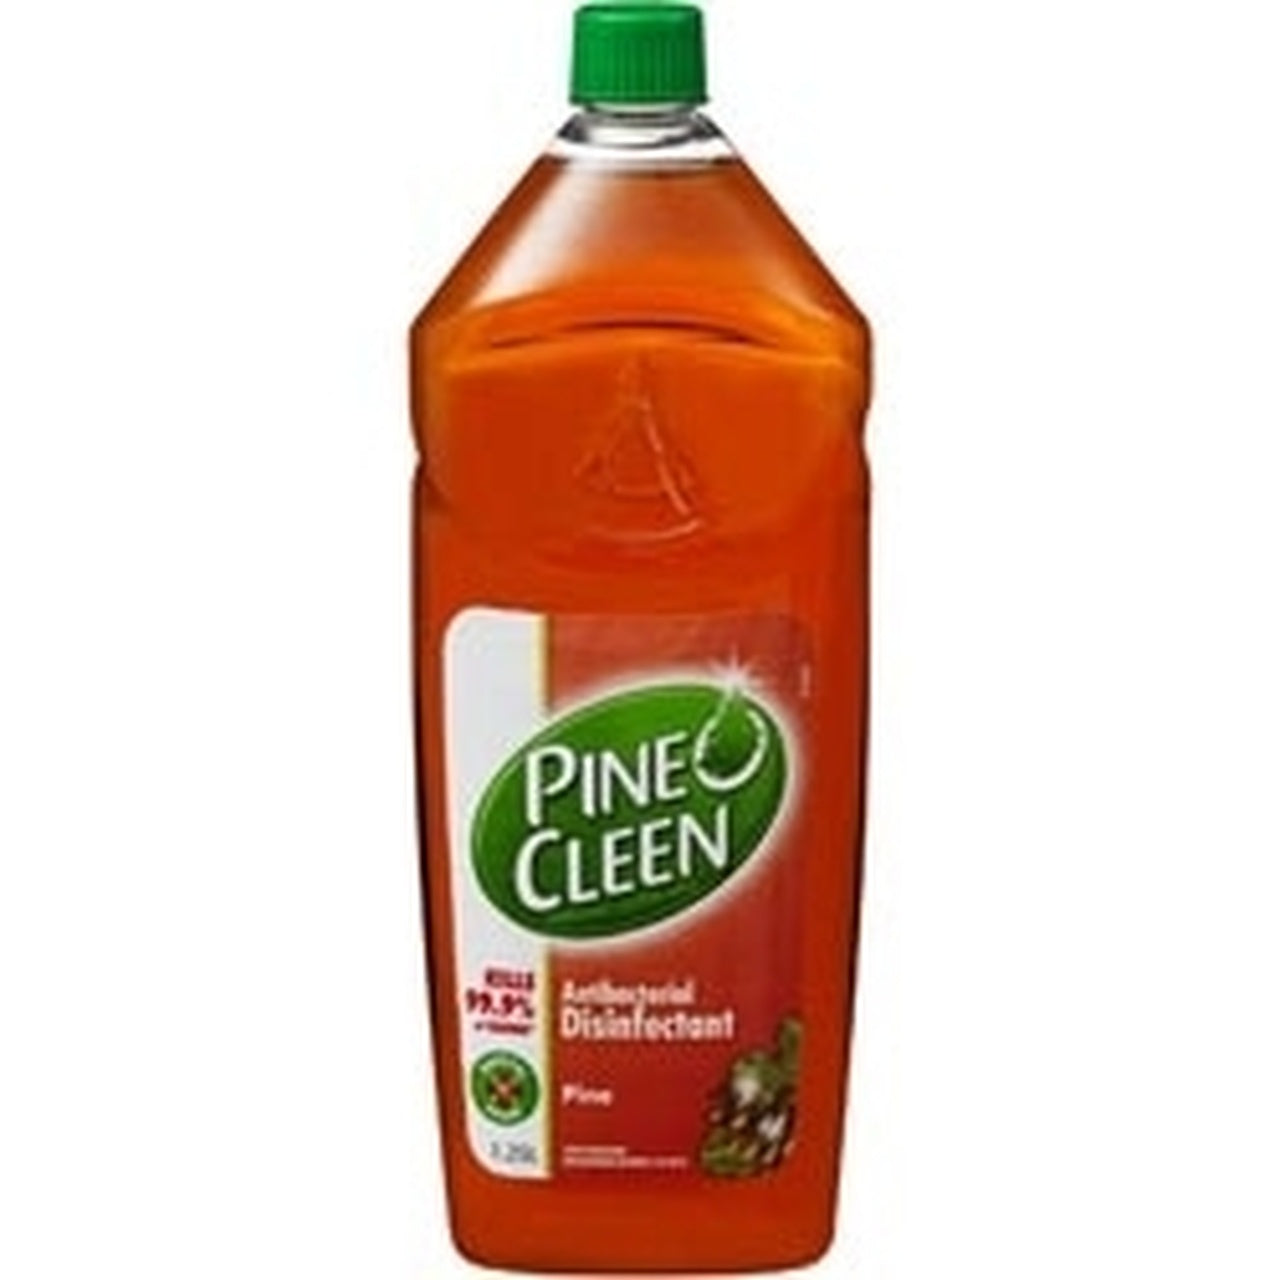 Pine O Cleen Disinfectant Pine 1.25L